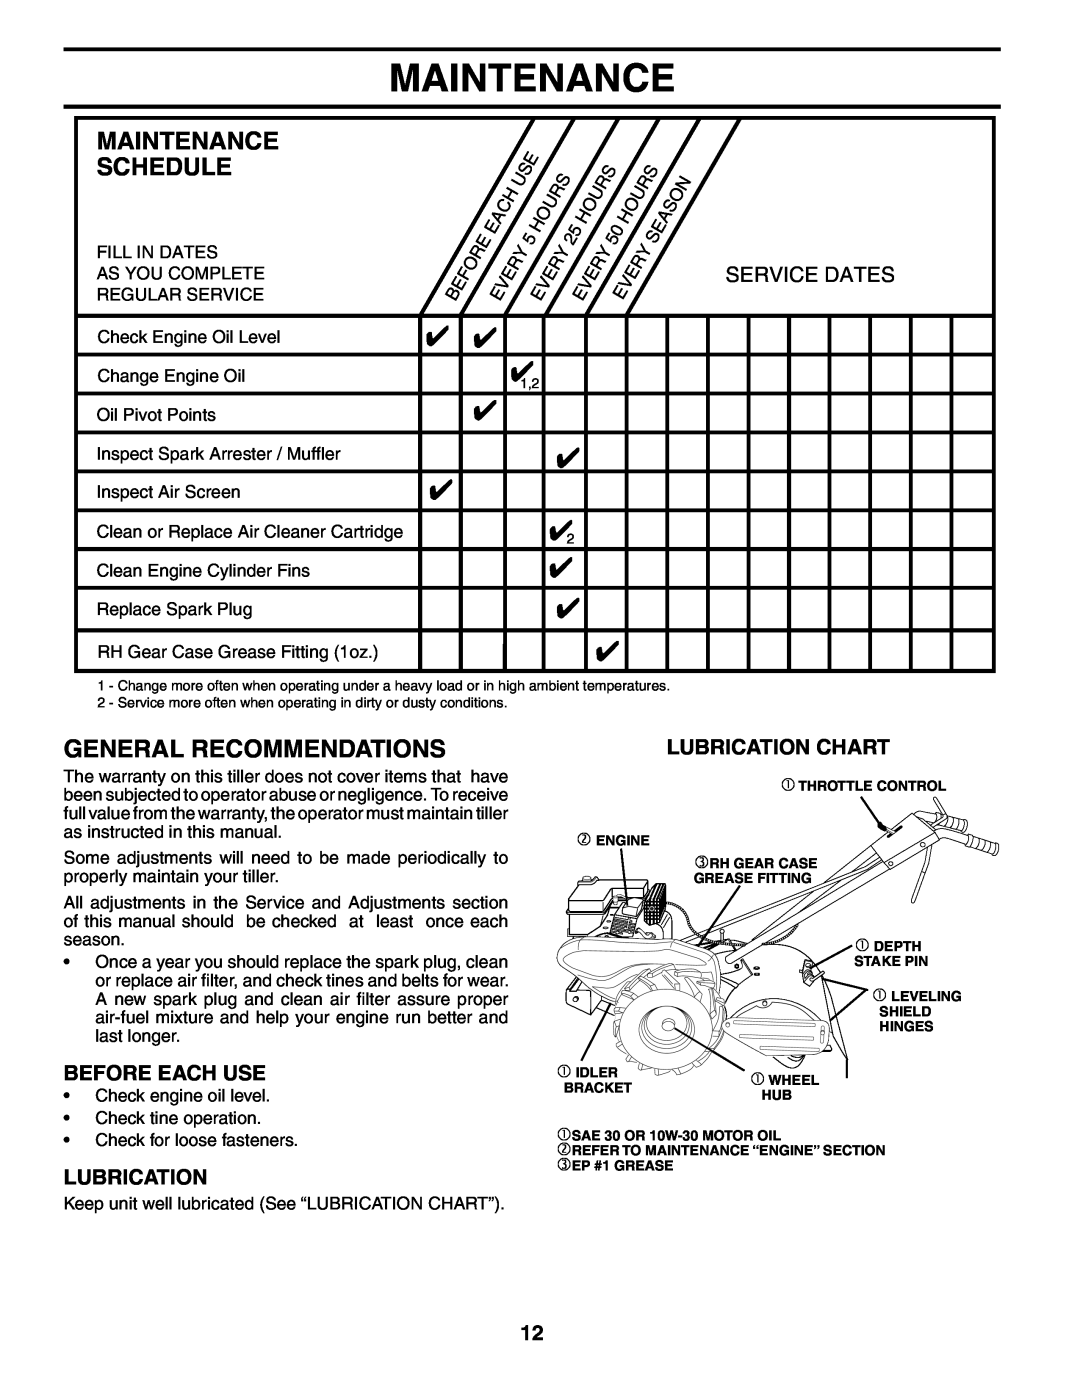 Weed Eater WET6500A owner manual Maintenance Schedule, General Recommendations, Before Each Use, Lubrication Chart 